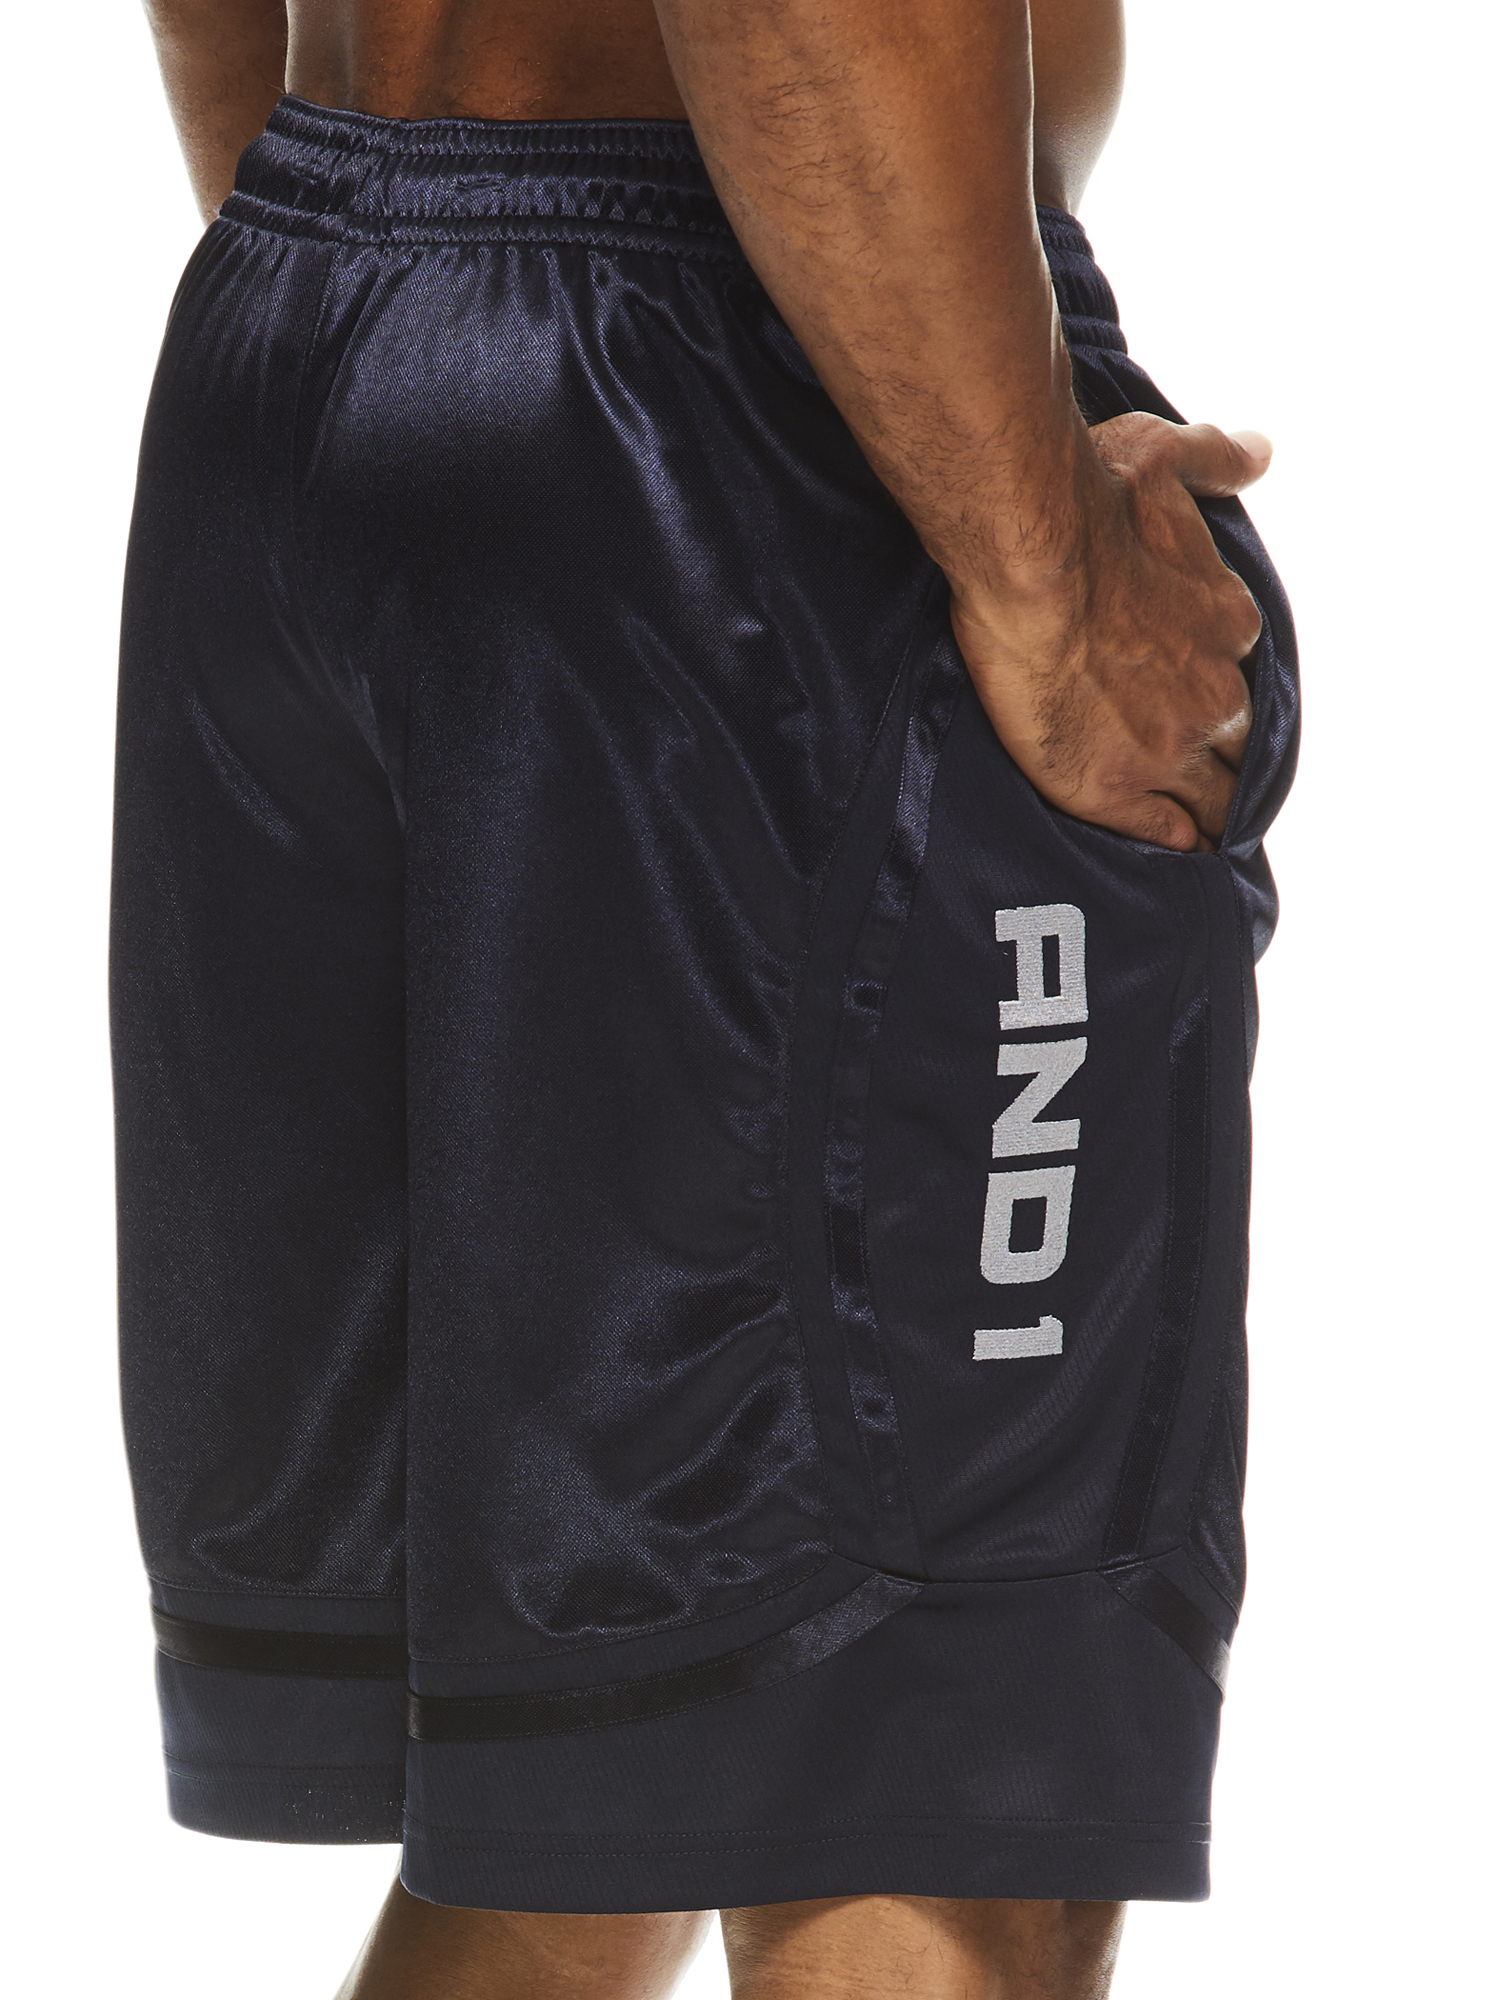 AND1 Men's and Big Men's Active Core 11" Home Court Basketball Shorts, Sizes S-5XL - image 4 of 5